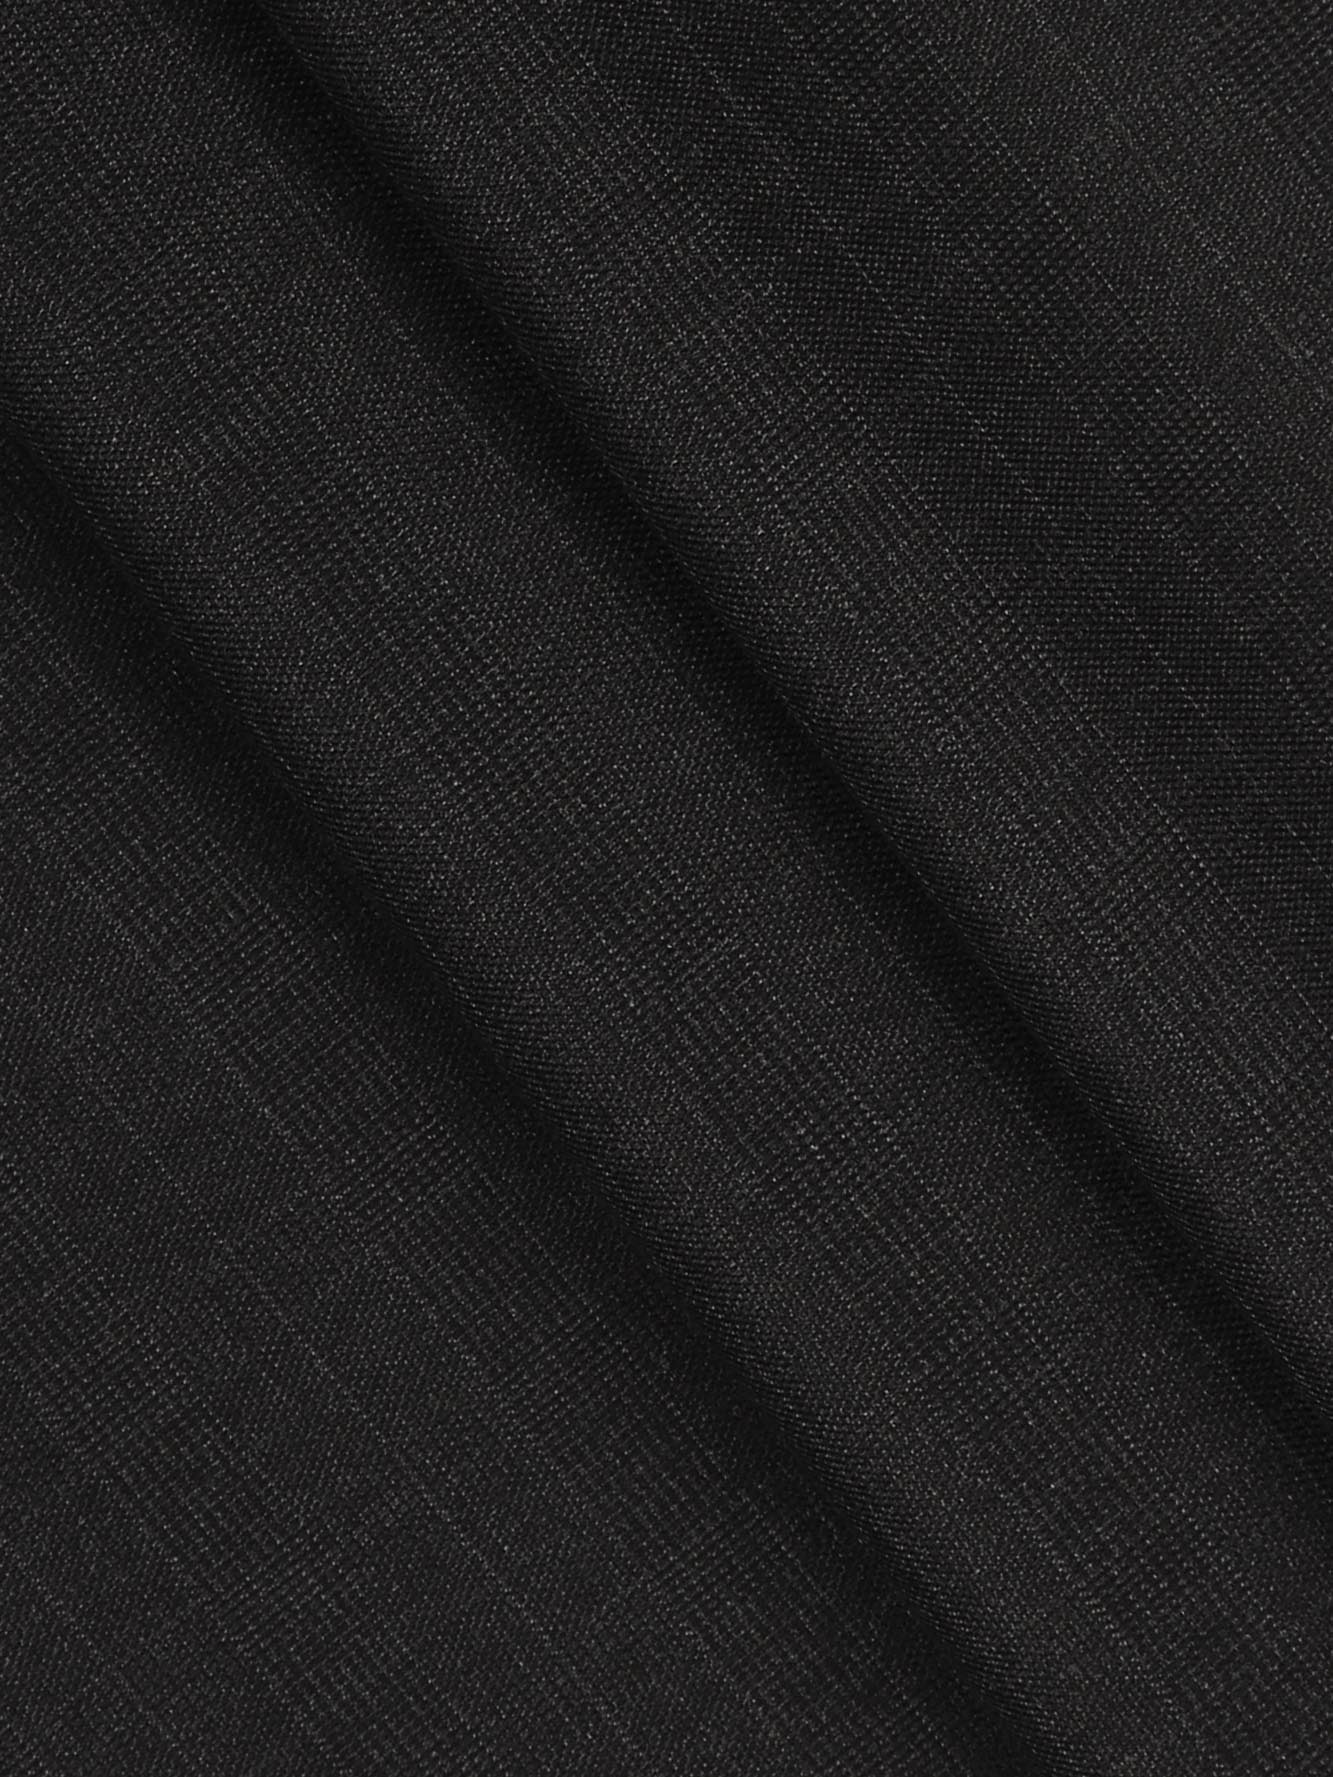 Cotton Black Smart Look Checked Suiting Fabric-Enable Stretch